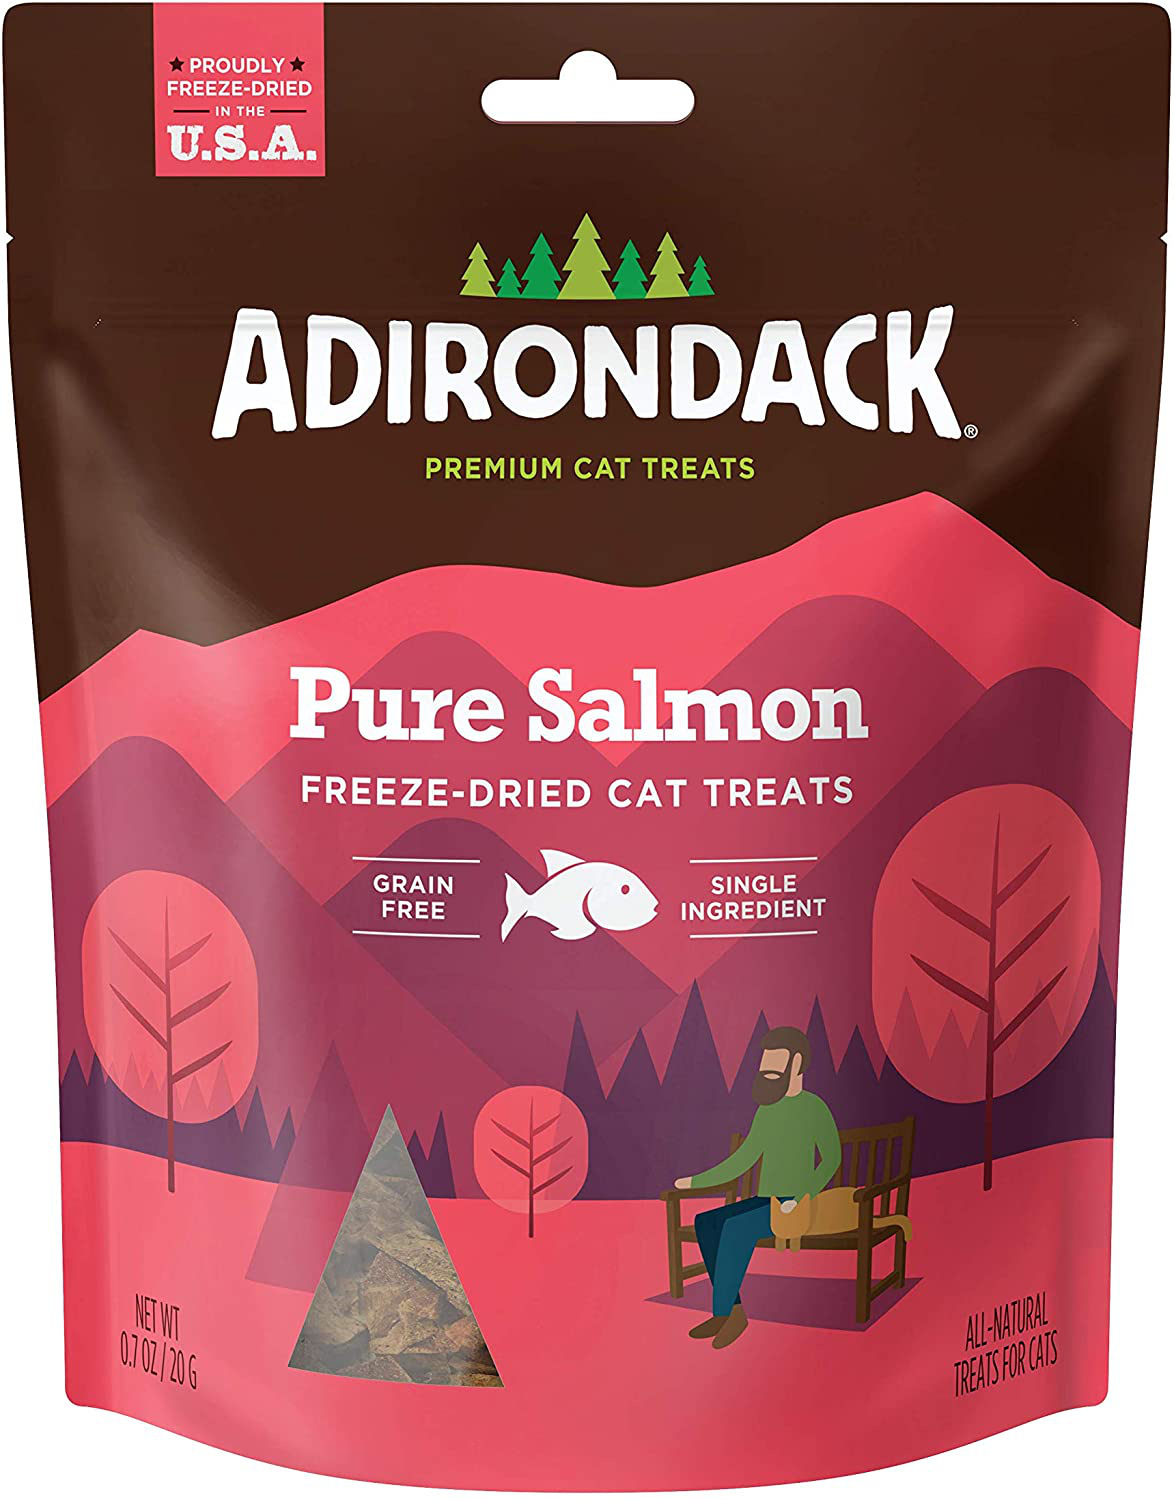 Adirondack Grain Free Cat Treats Made in USA Only (Single Ingredient, Freeze Dried Cat Treats), Resealable Bag to Preserve Freshness, 2 Flavor Varieties Animals & Pet Supplies > Pet Supplies > Cat Supplies > Cat Treats Adirondack Pet Food Pure Salmon - 0.7 oz.  